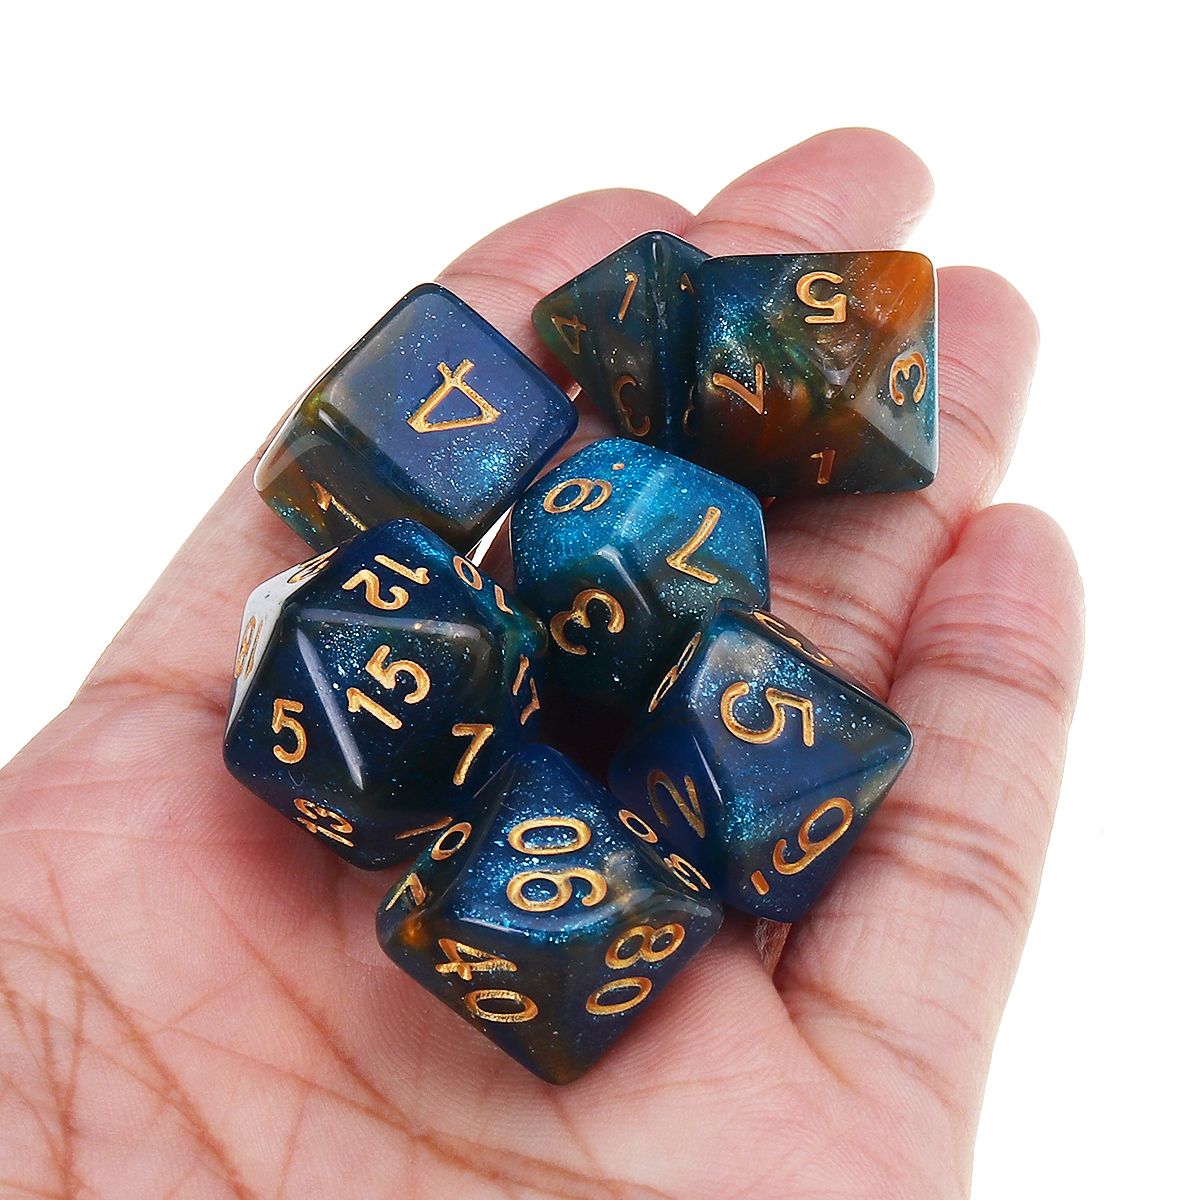 7pcsSet-Polyhedral-Dices-for-DND-RPG-MTG-Game-Dungeons-amp-Dragons-D4-D20-Colors-Dice-1633756